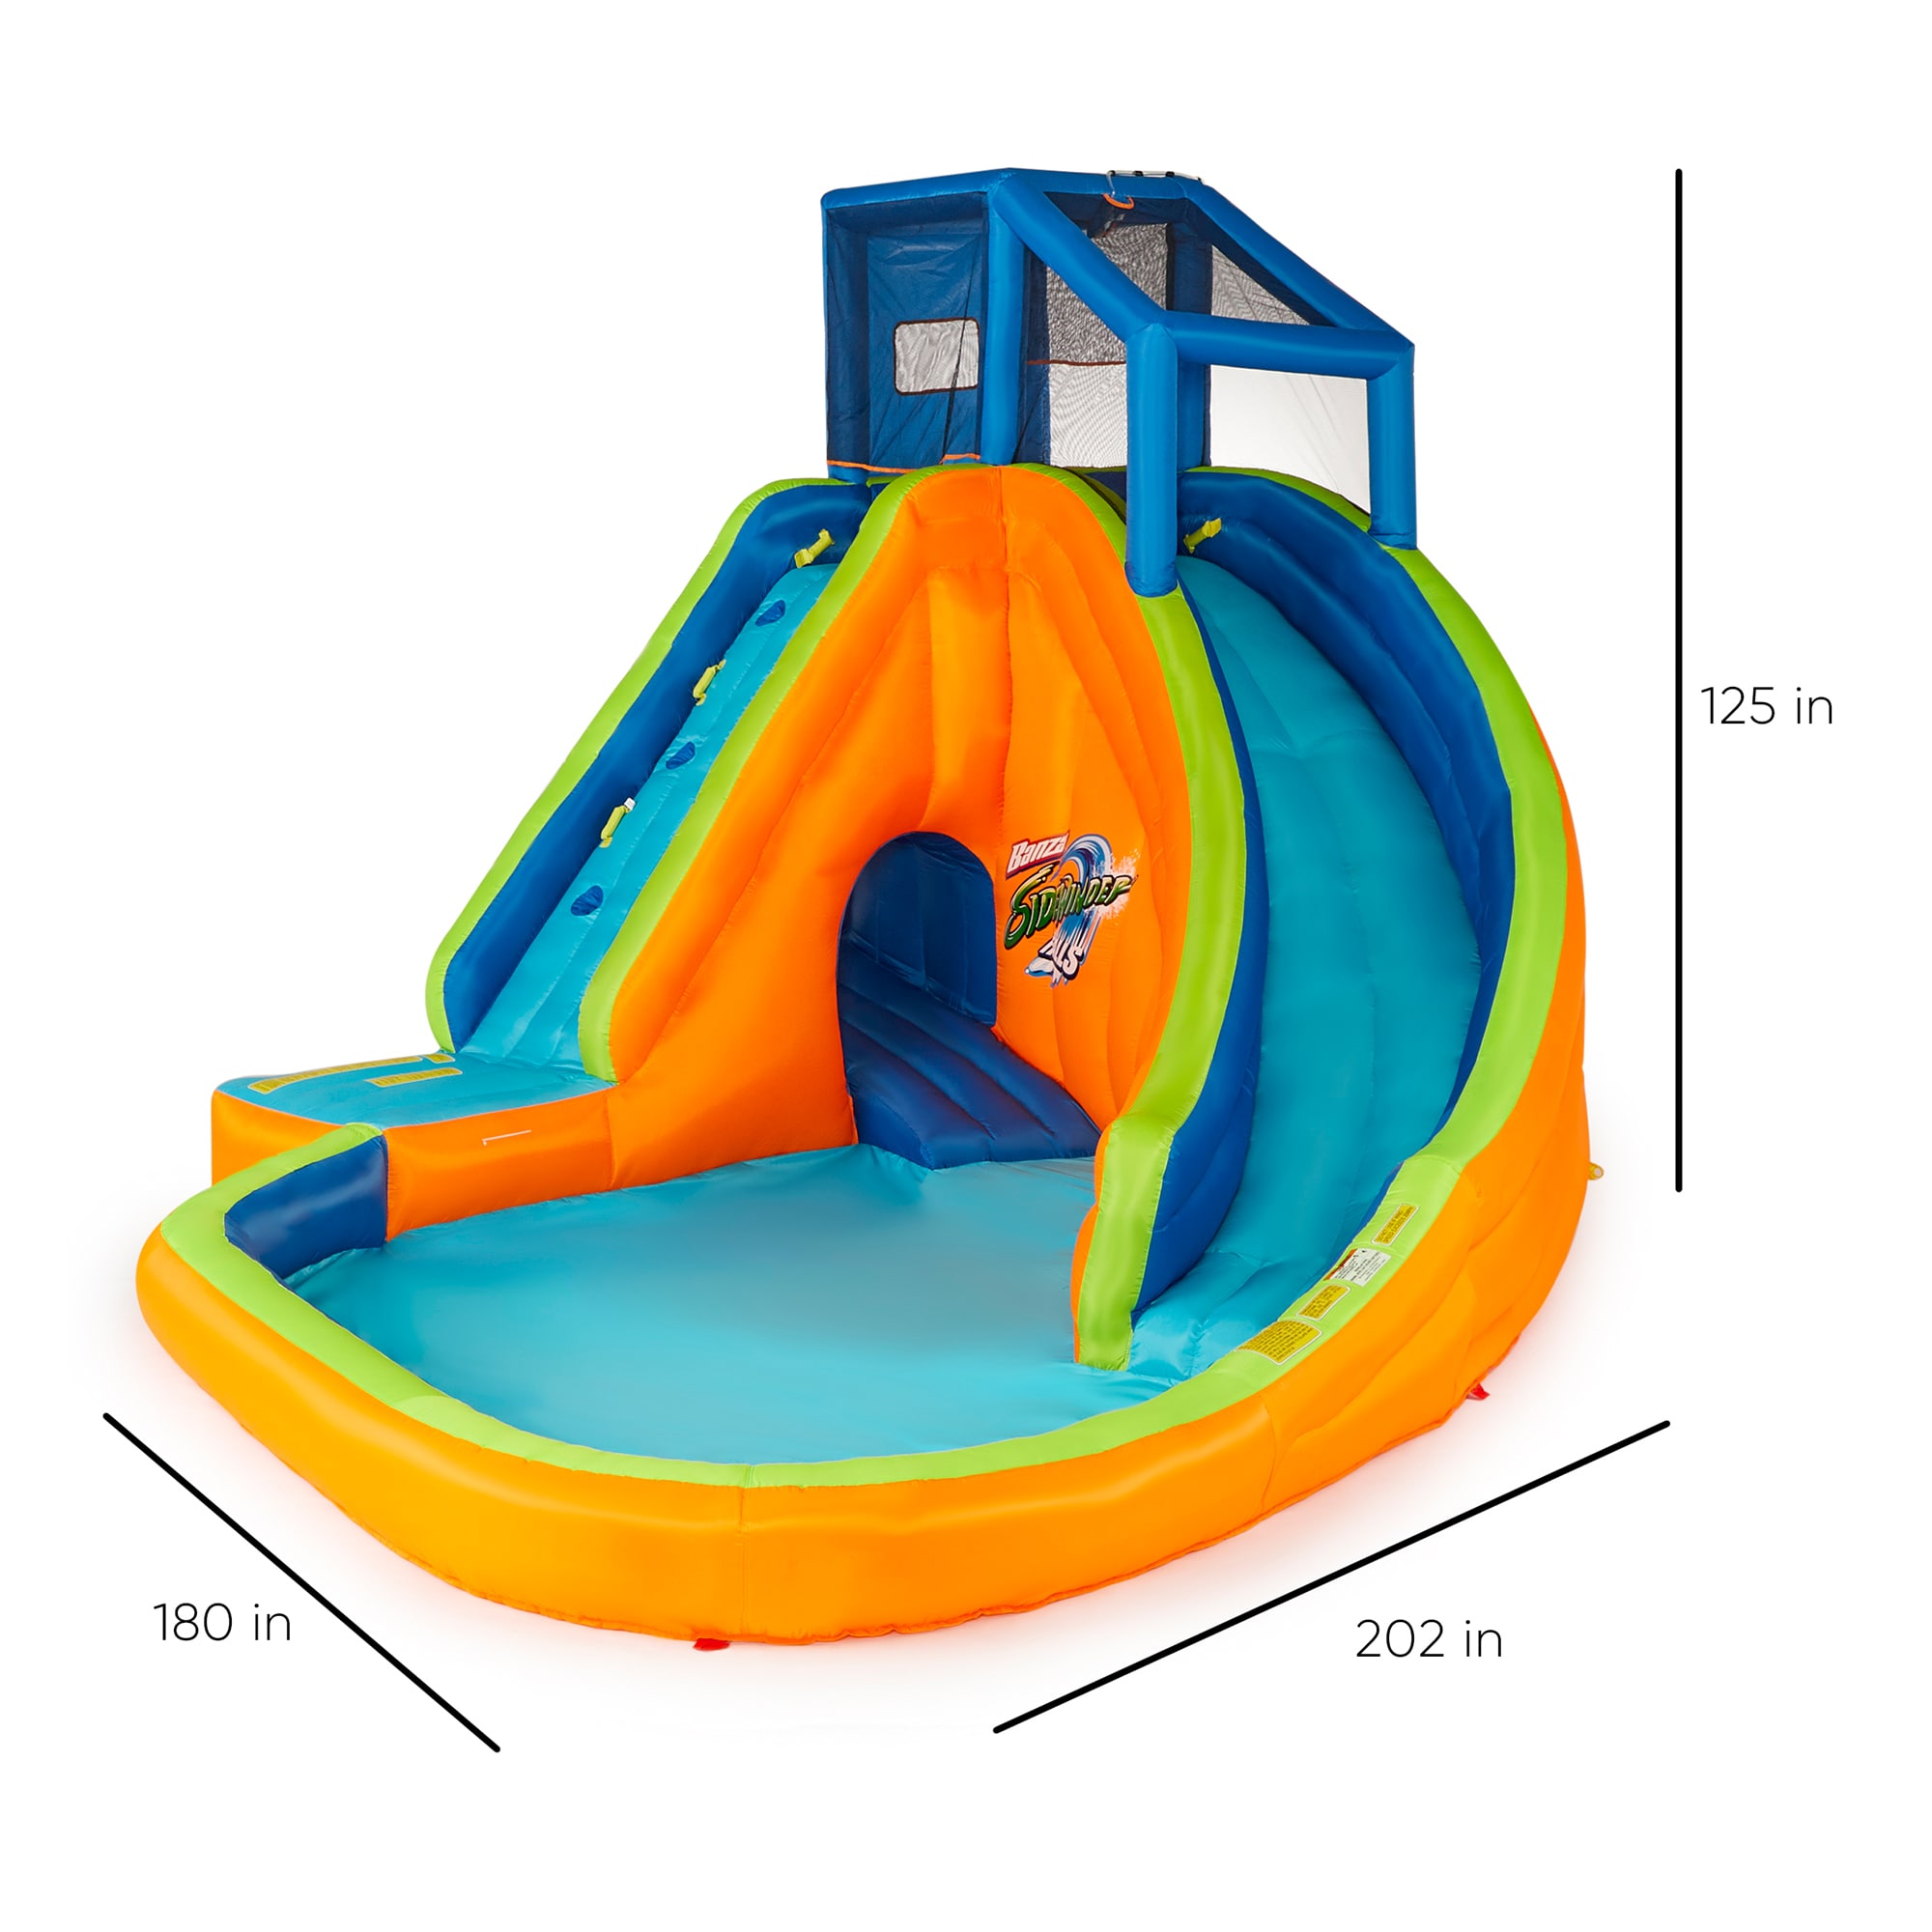 BANZAI 90494 Sidewinder Falls Inflatable Water Slide with Tunnel Ramp Slide 